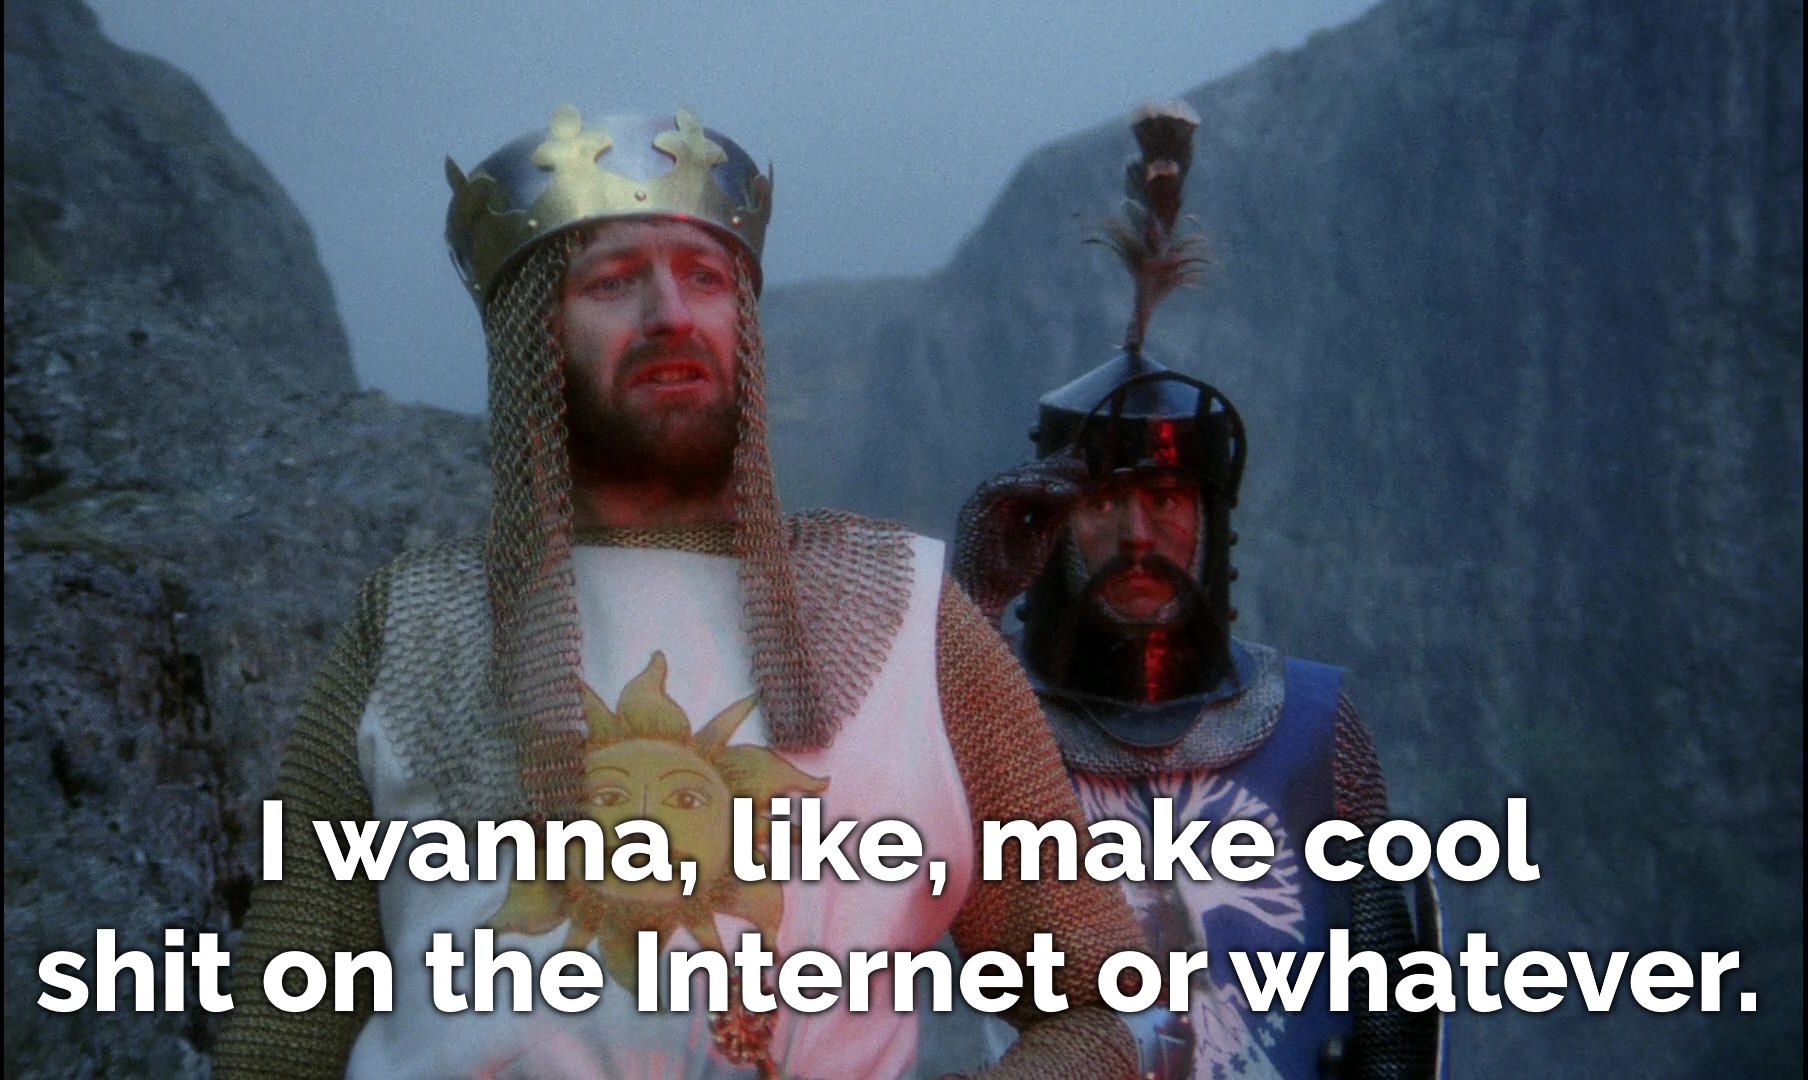 King Arthur again, but now he says "I wanna, like, make cool shit on the Internet or whatever."